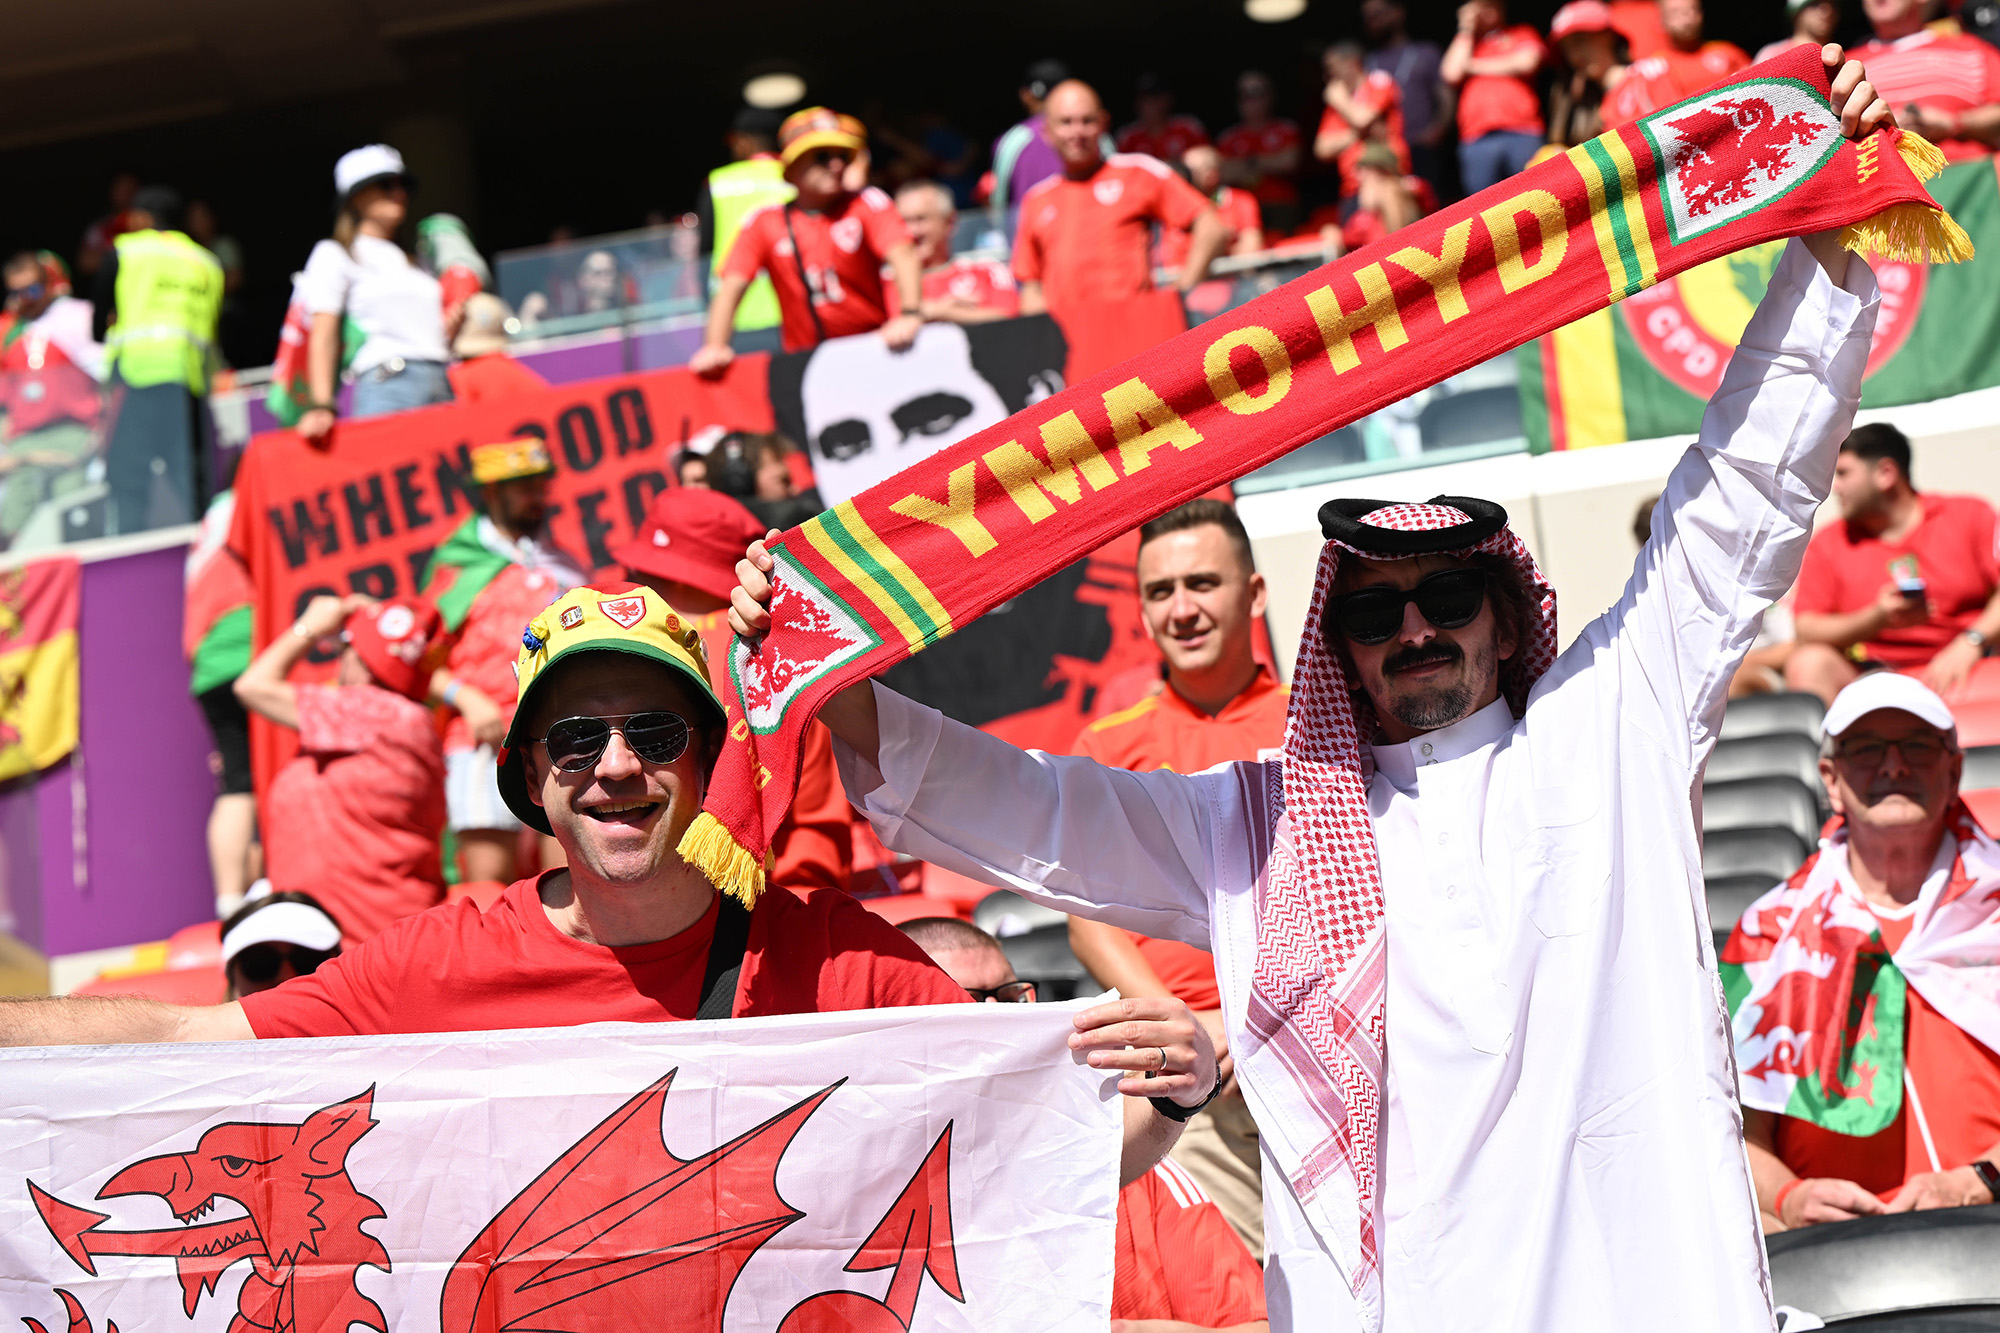 Wales fans in the stands before the match at Ahmad bin Ali Stadium in Al-Rajjan on November 25.